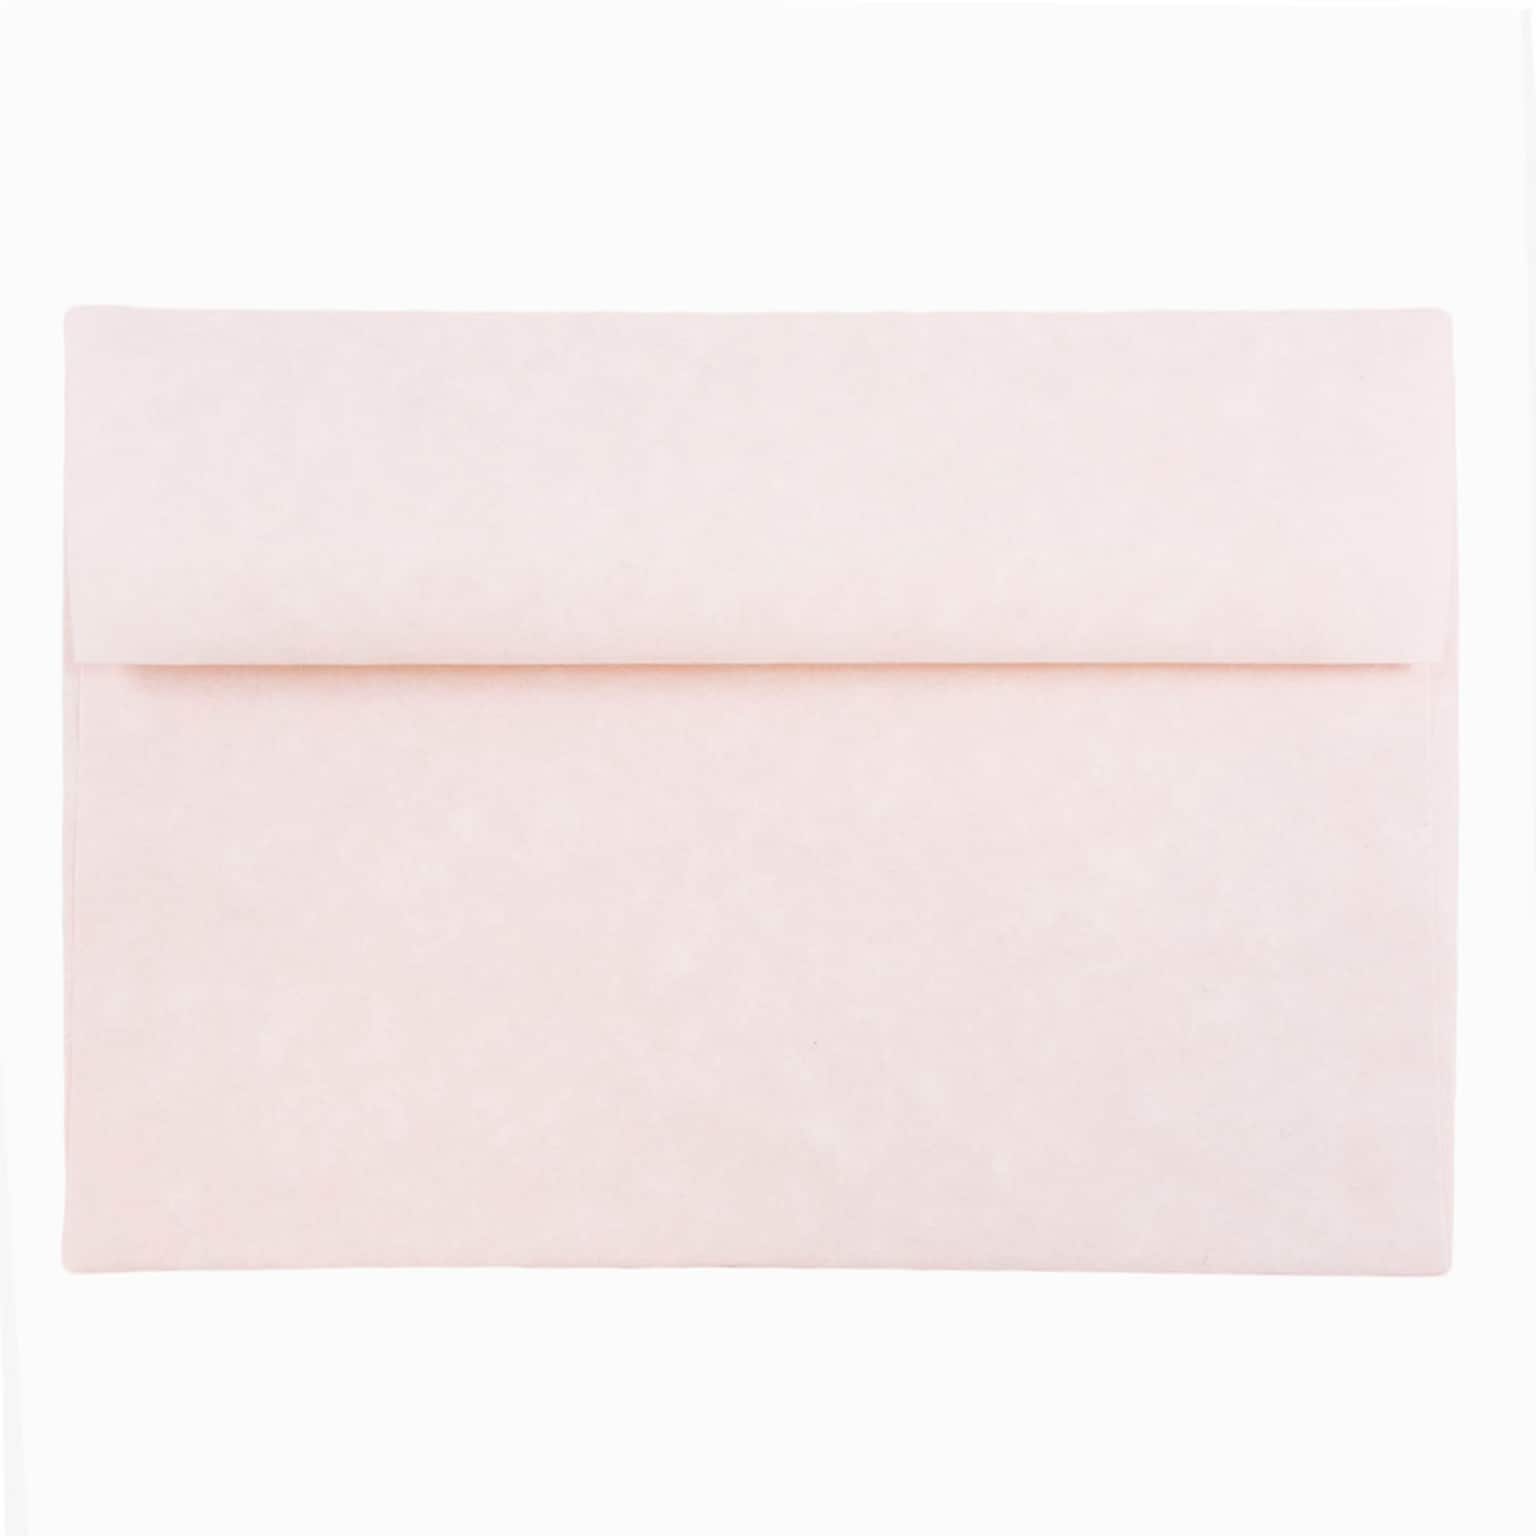 JAM Paper® A8 Parchment Invitation Envelopes, 5.5 x 8.125, Pink Recycled, 25/Pack (63750)